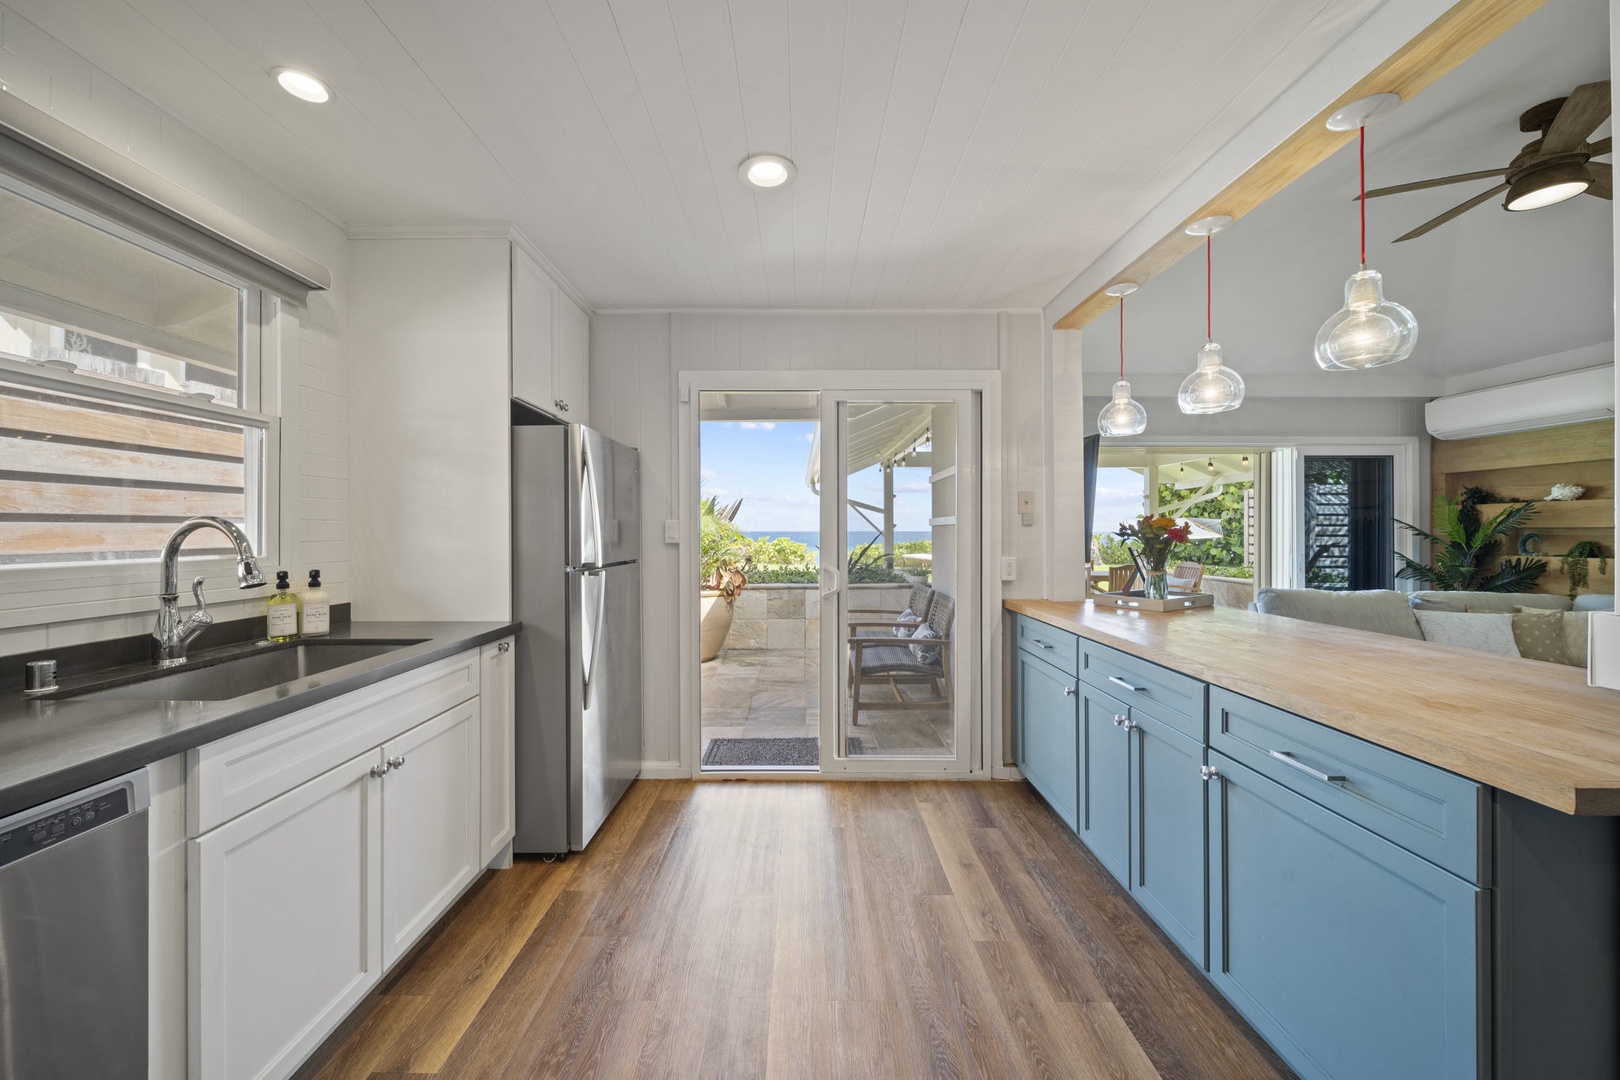 Haleiwa Vacation Rentals, Hale Nalu - Enjoy the gorgeous views from the kitchen while preparing a meal